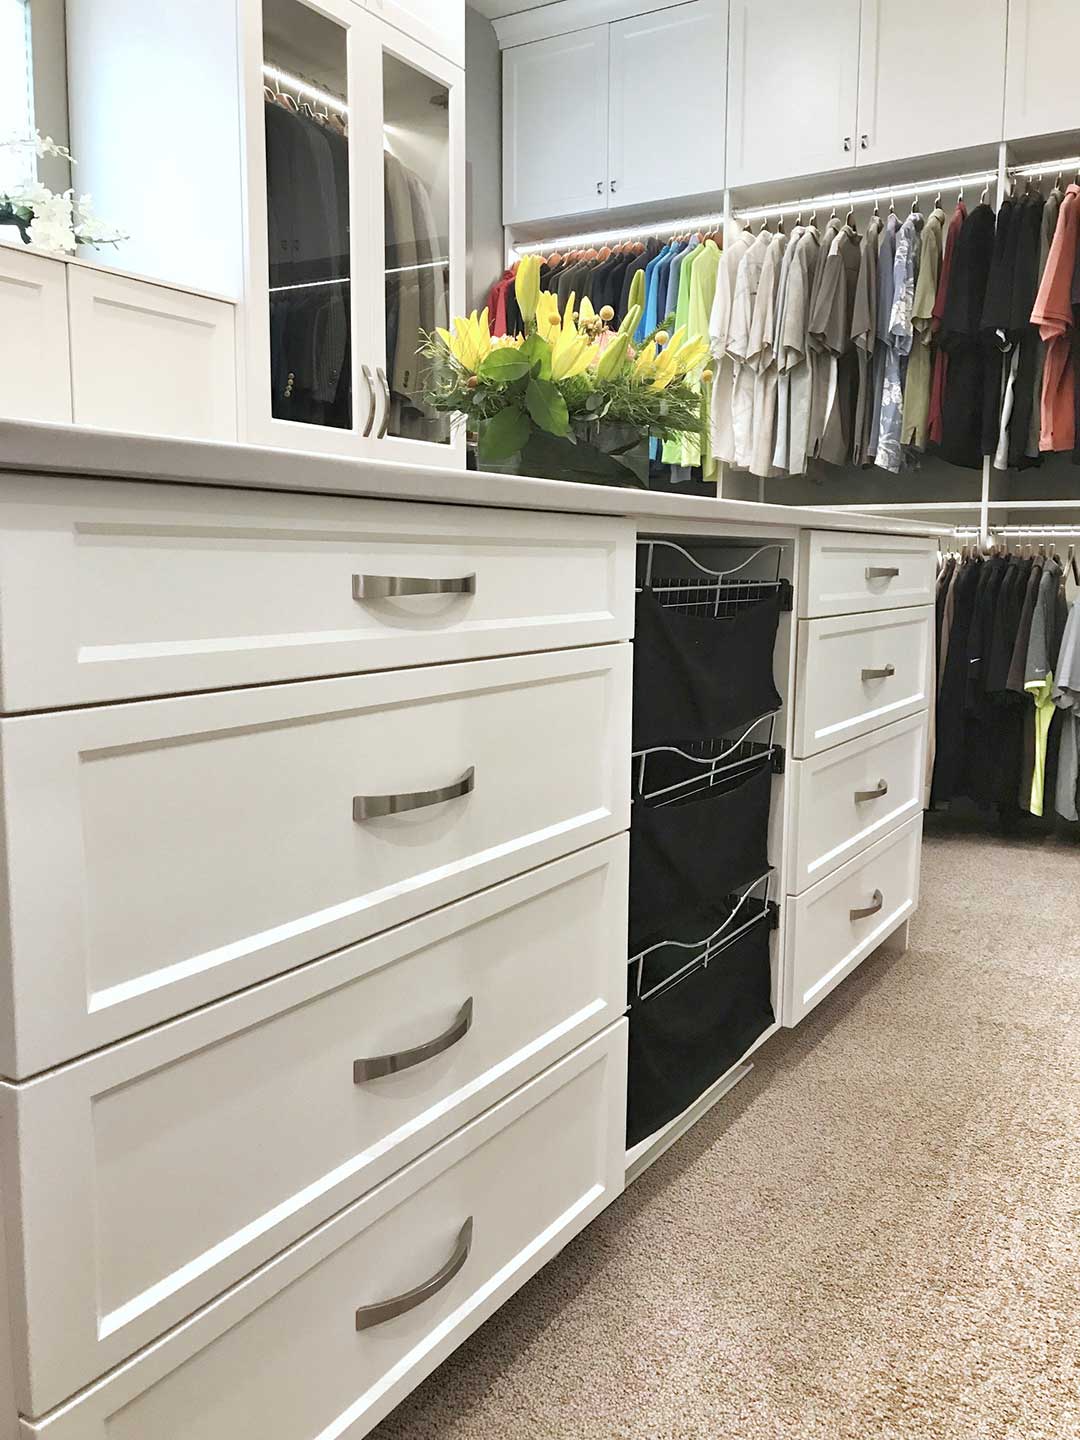 Closet built-in showing dresser and clothes hamper